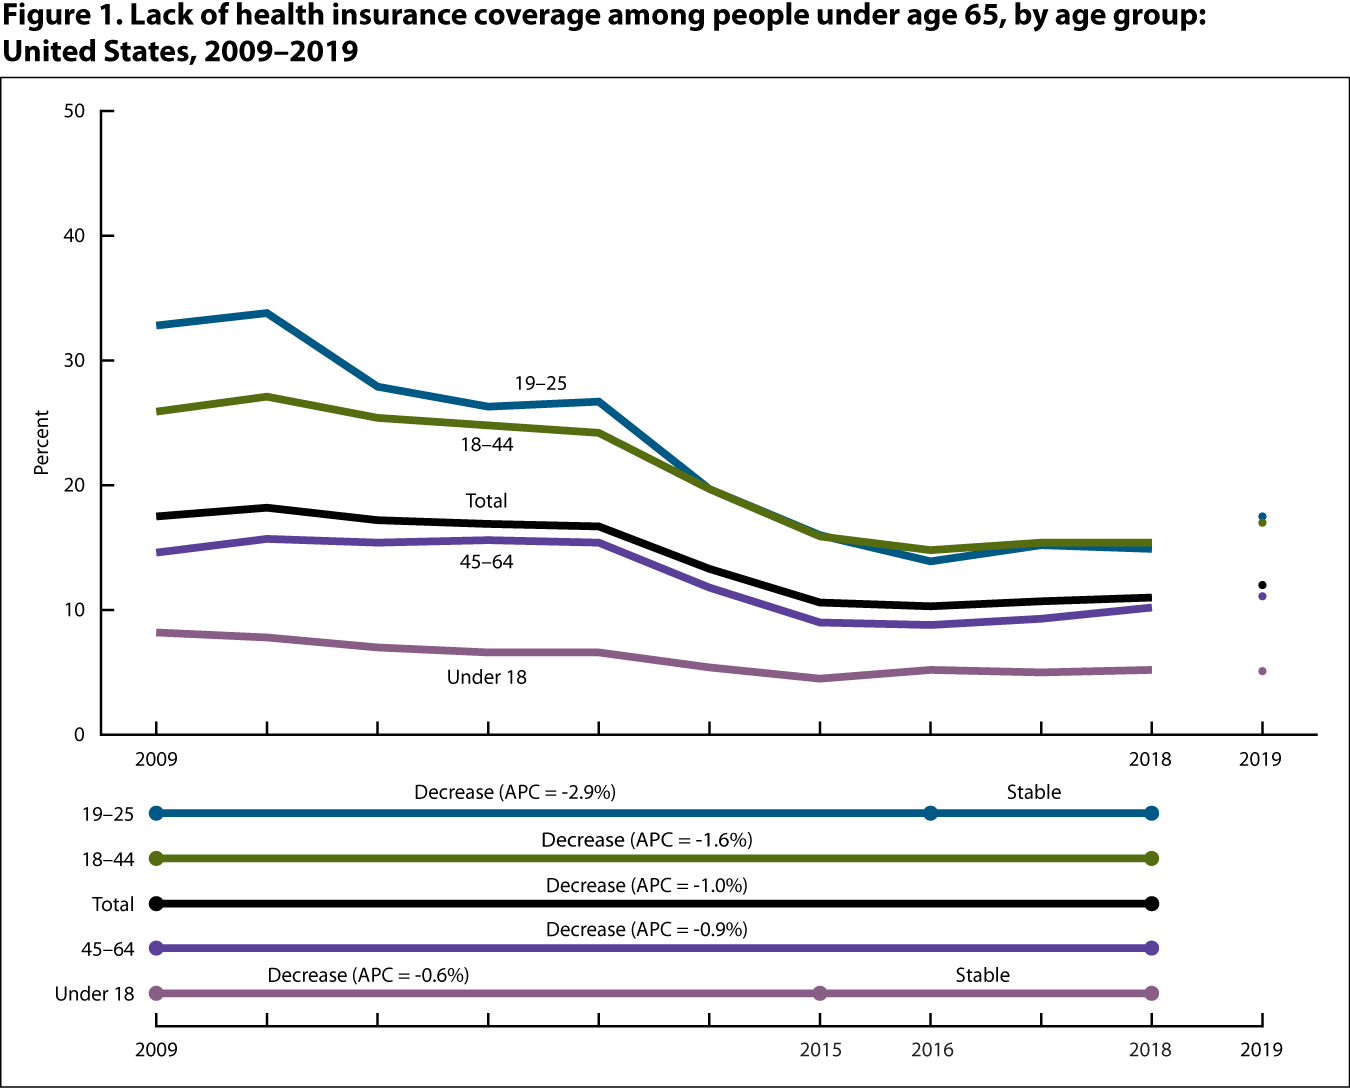 Figure 1 is a line graph showing the percentage of people under age 65 with lack of health insurance coverage, by age group for 2009 through 2018 and at 2019 (point).